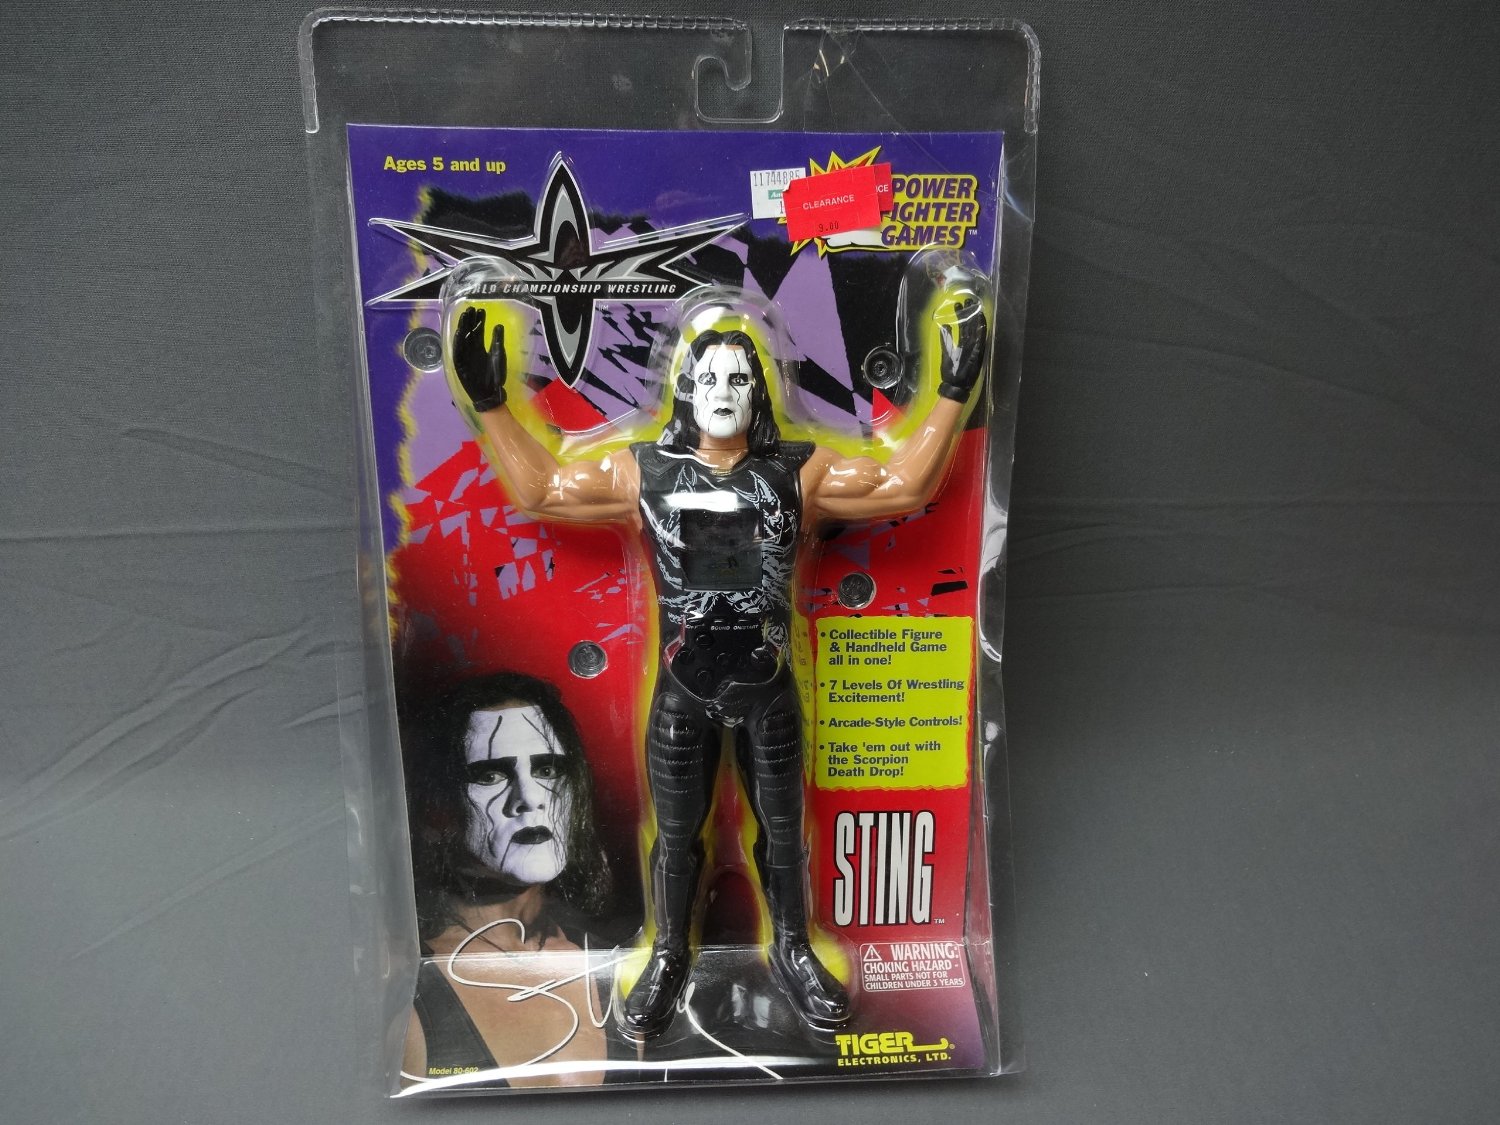 WCW Power Fighter game Sting 1